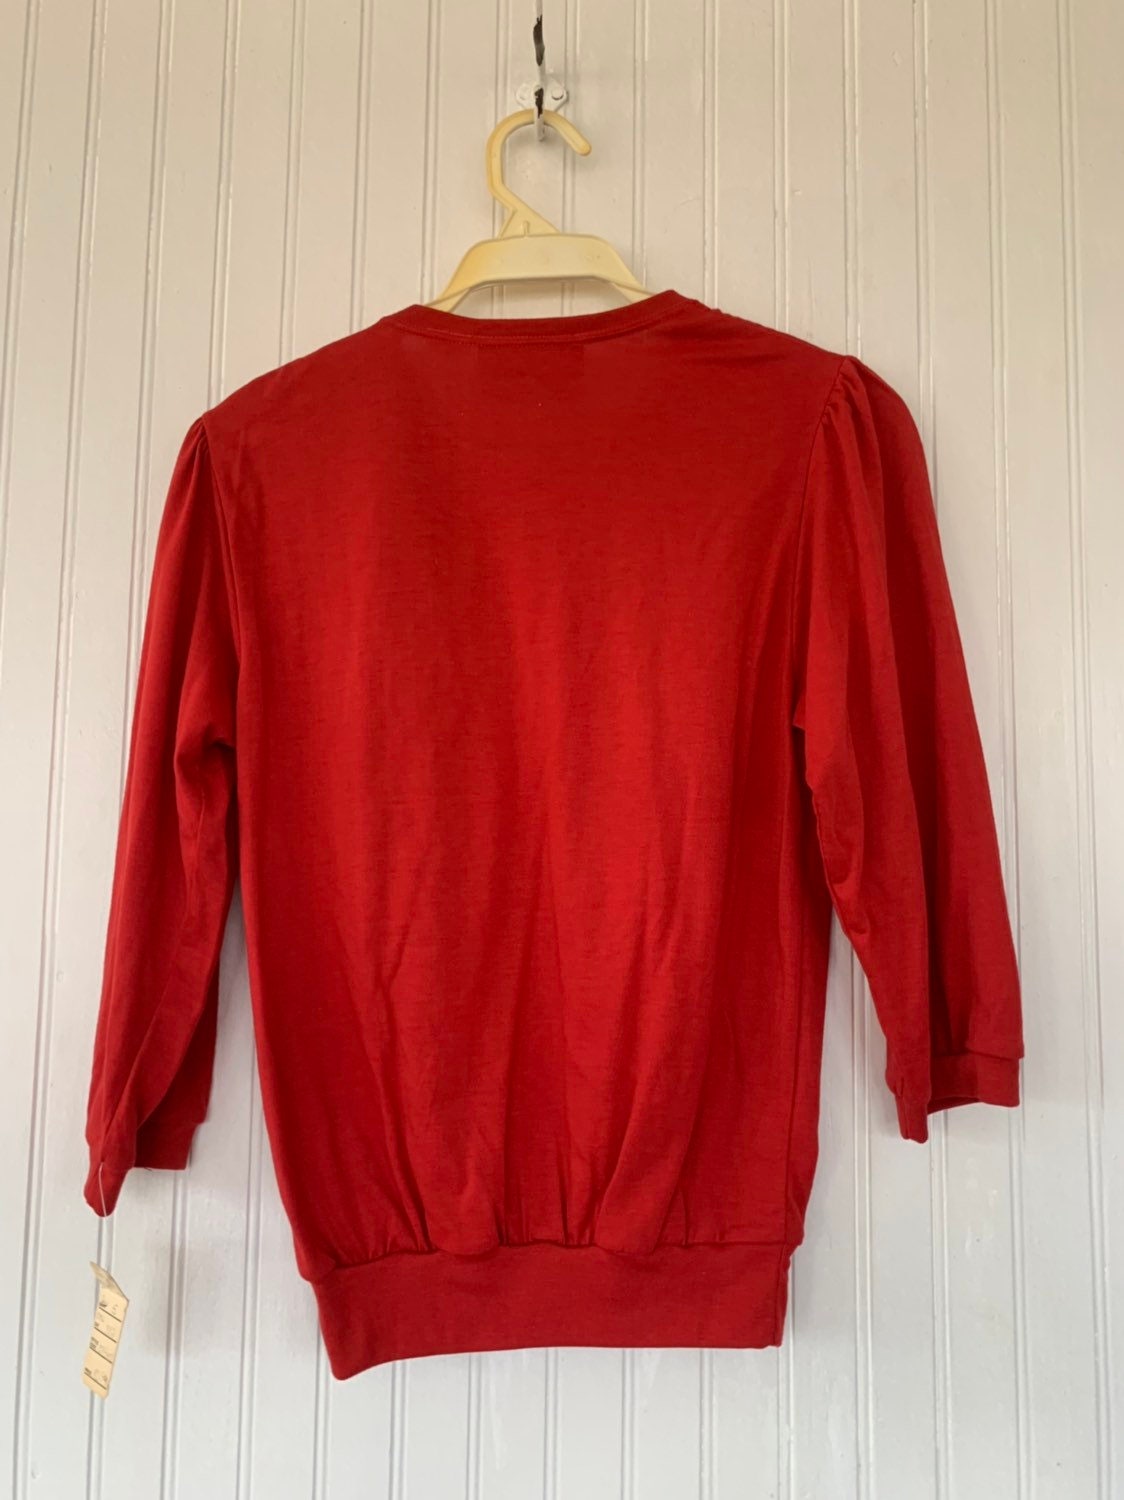 Unique Vintage 70s 80s Bright Red Puff Sleeve Top Shirt Small S xs ...